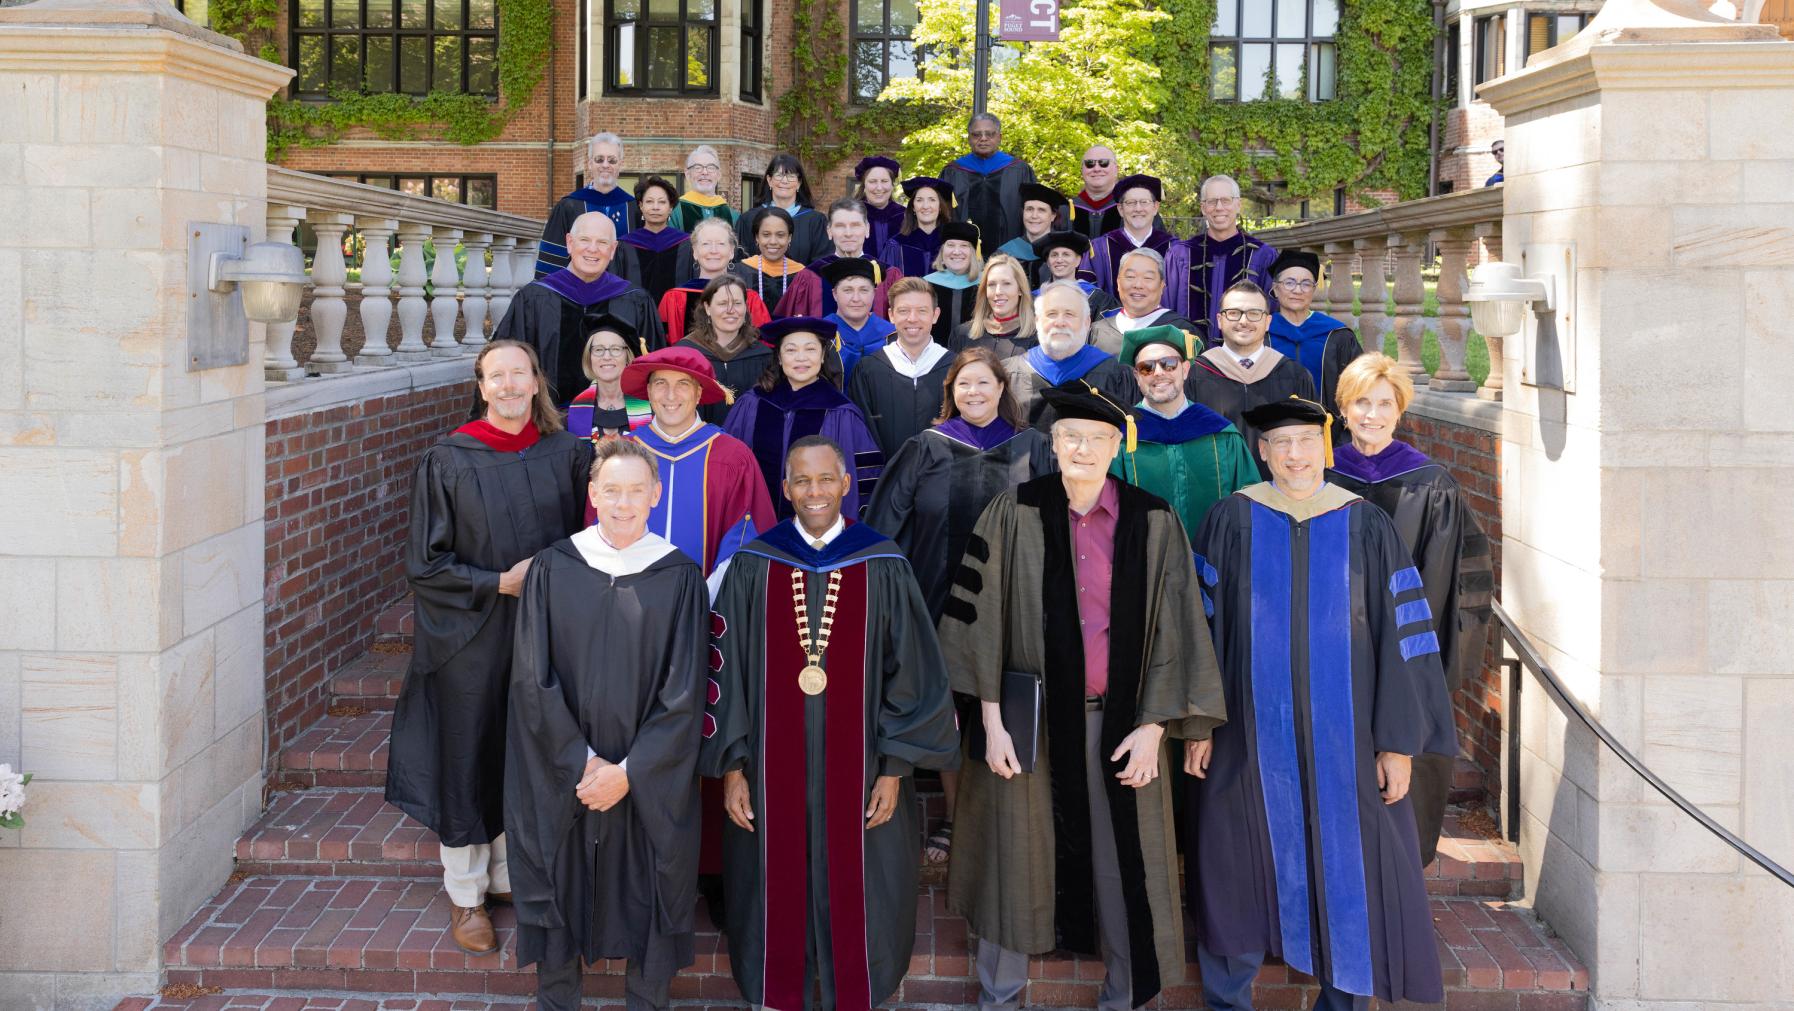 Trustees, Cabinet, and faculty members gather to walk to Commencement ceremonies.